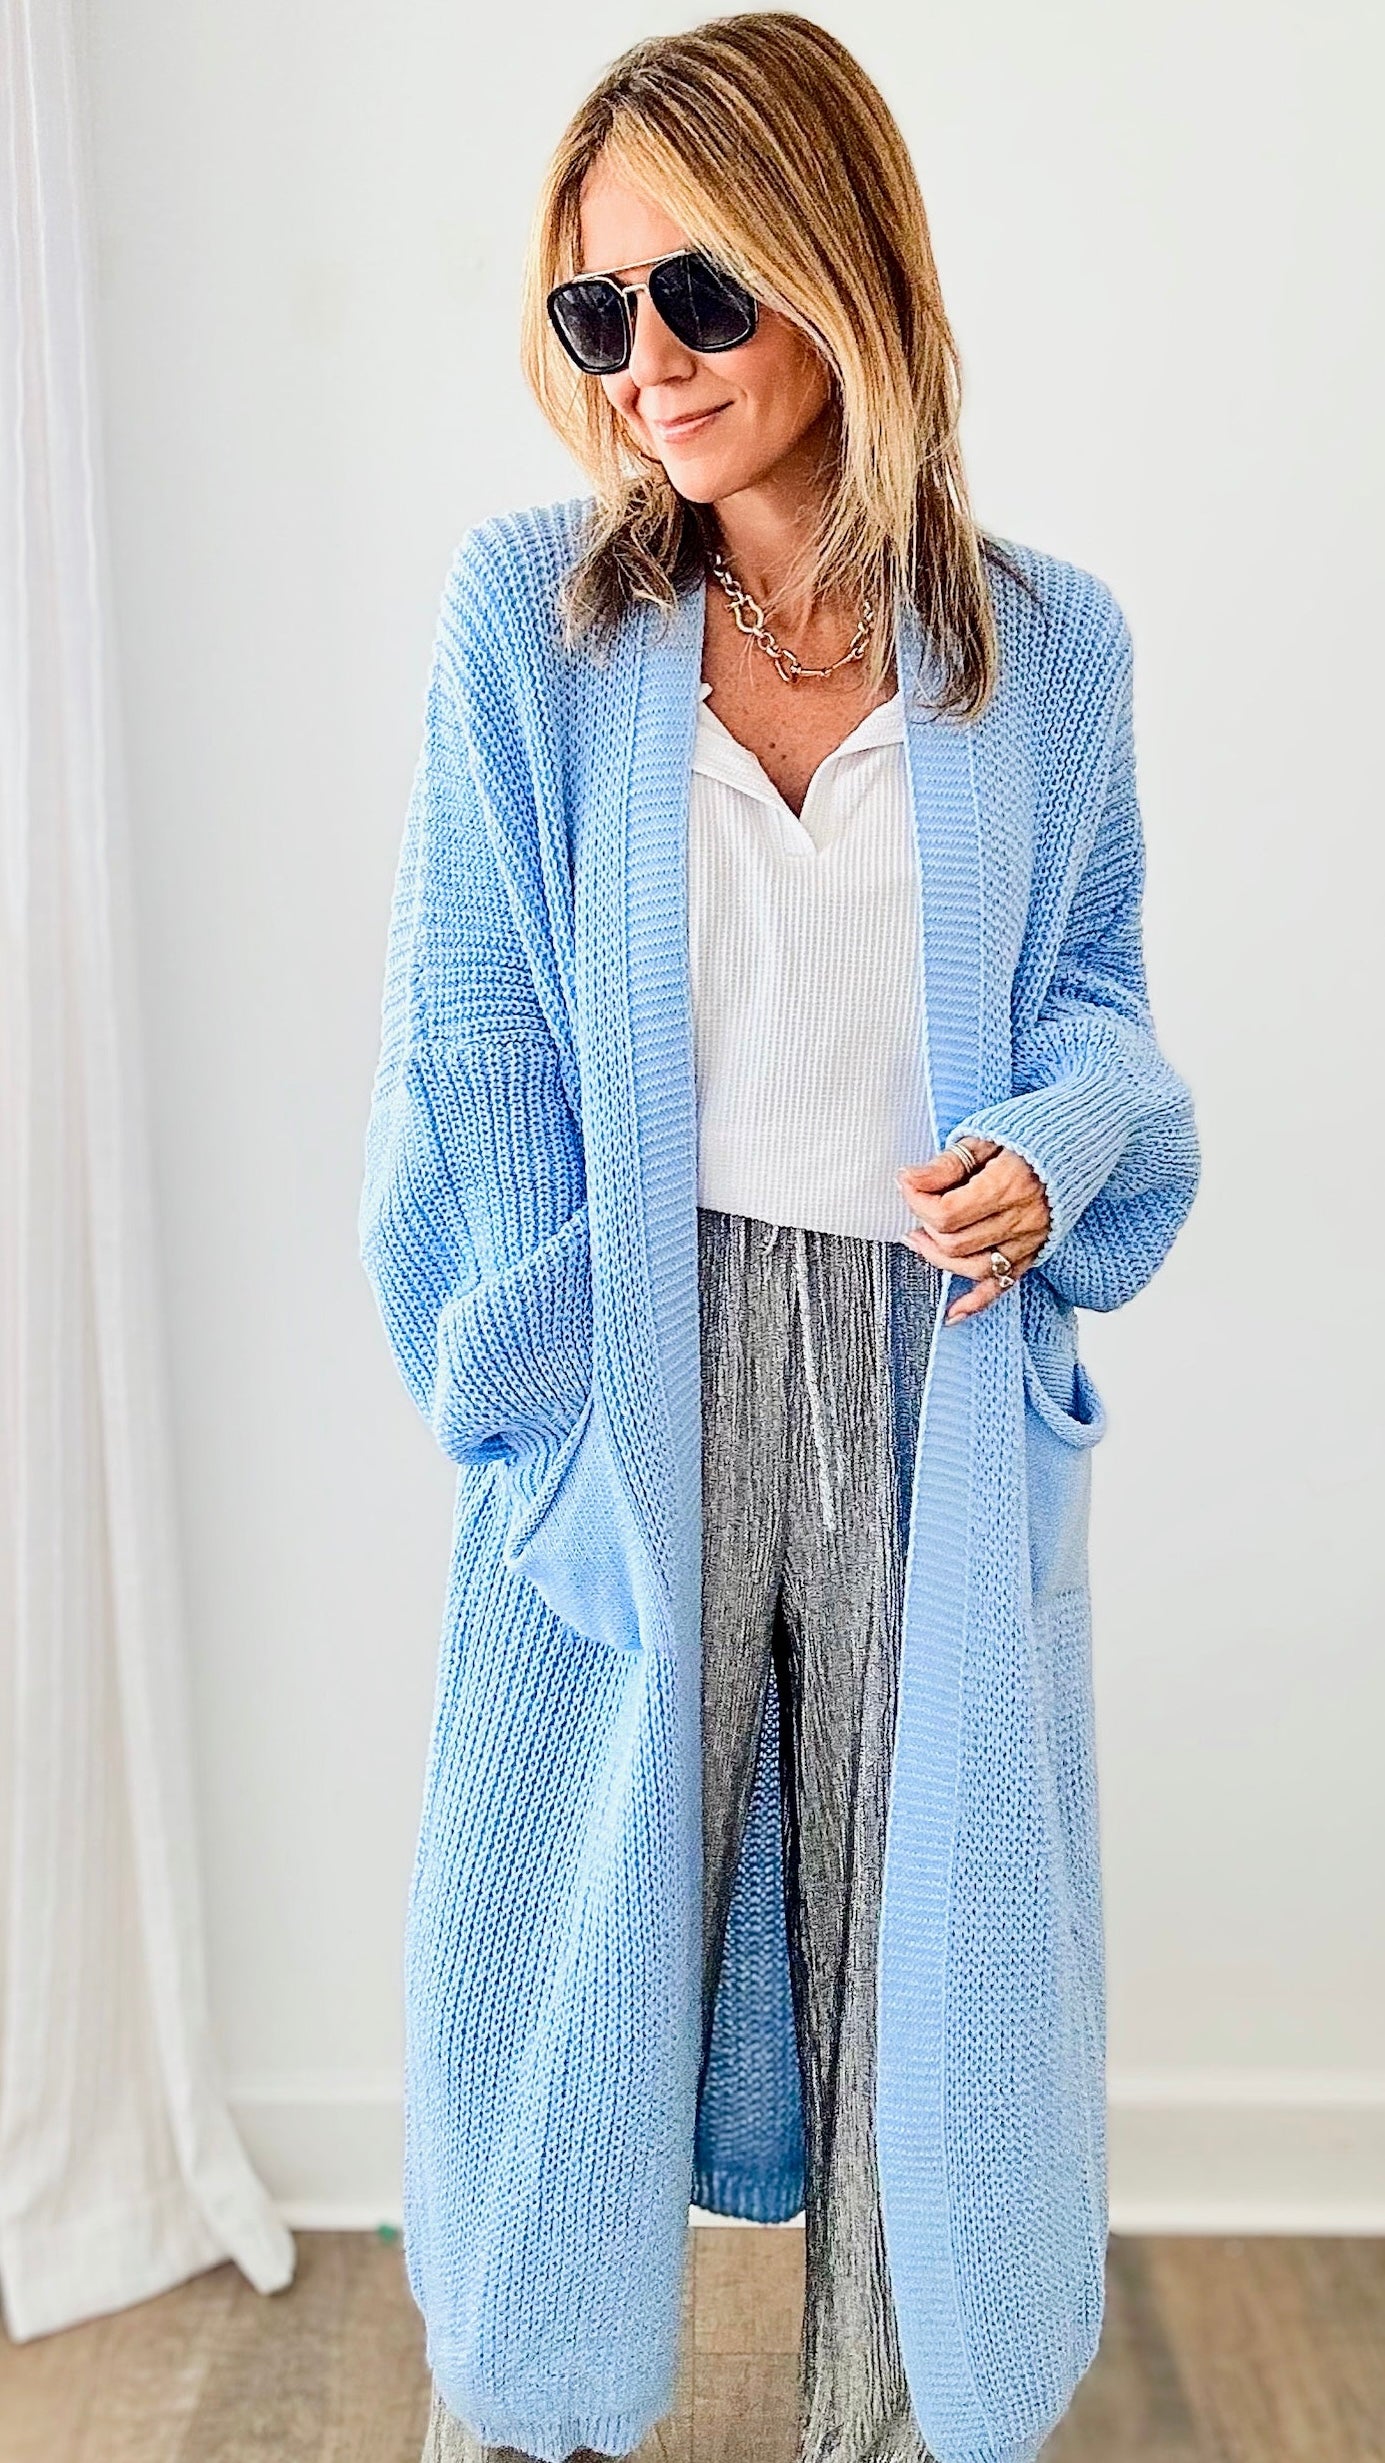 Sugar High Long Italian Cardigan- Dusty Blue-150 Cardigans/Layers-Germany-Coastal Bloom Boutique, find the trendiest versions of the popular styles and looks Located in Indialantic, FL